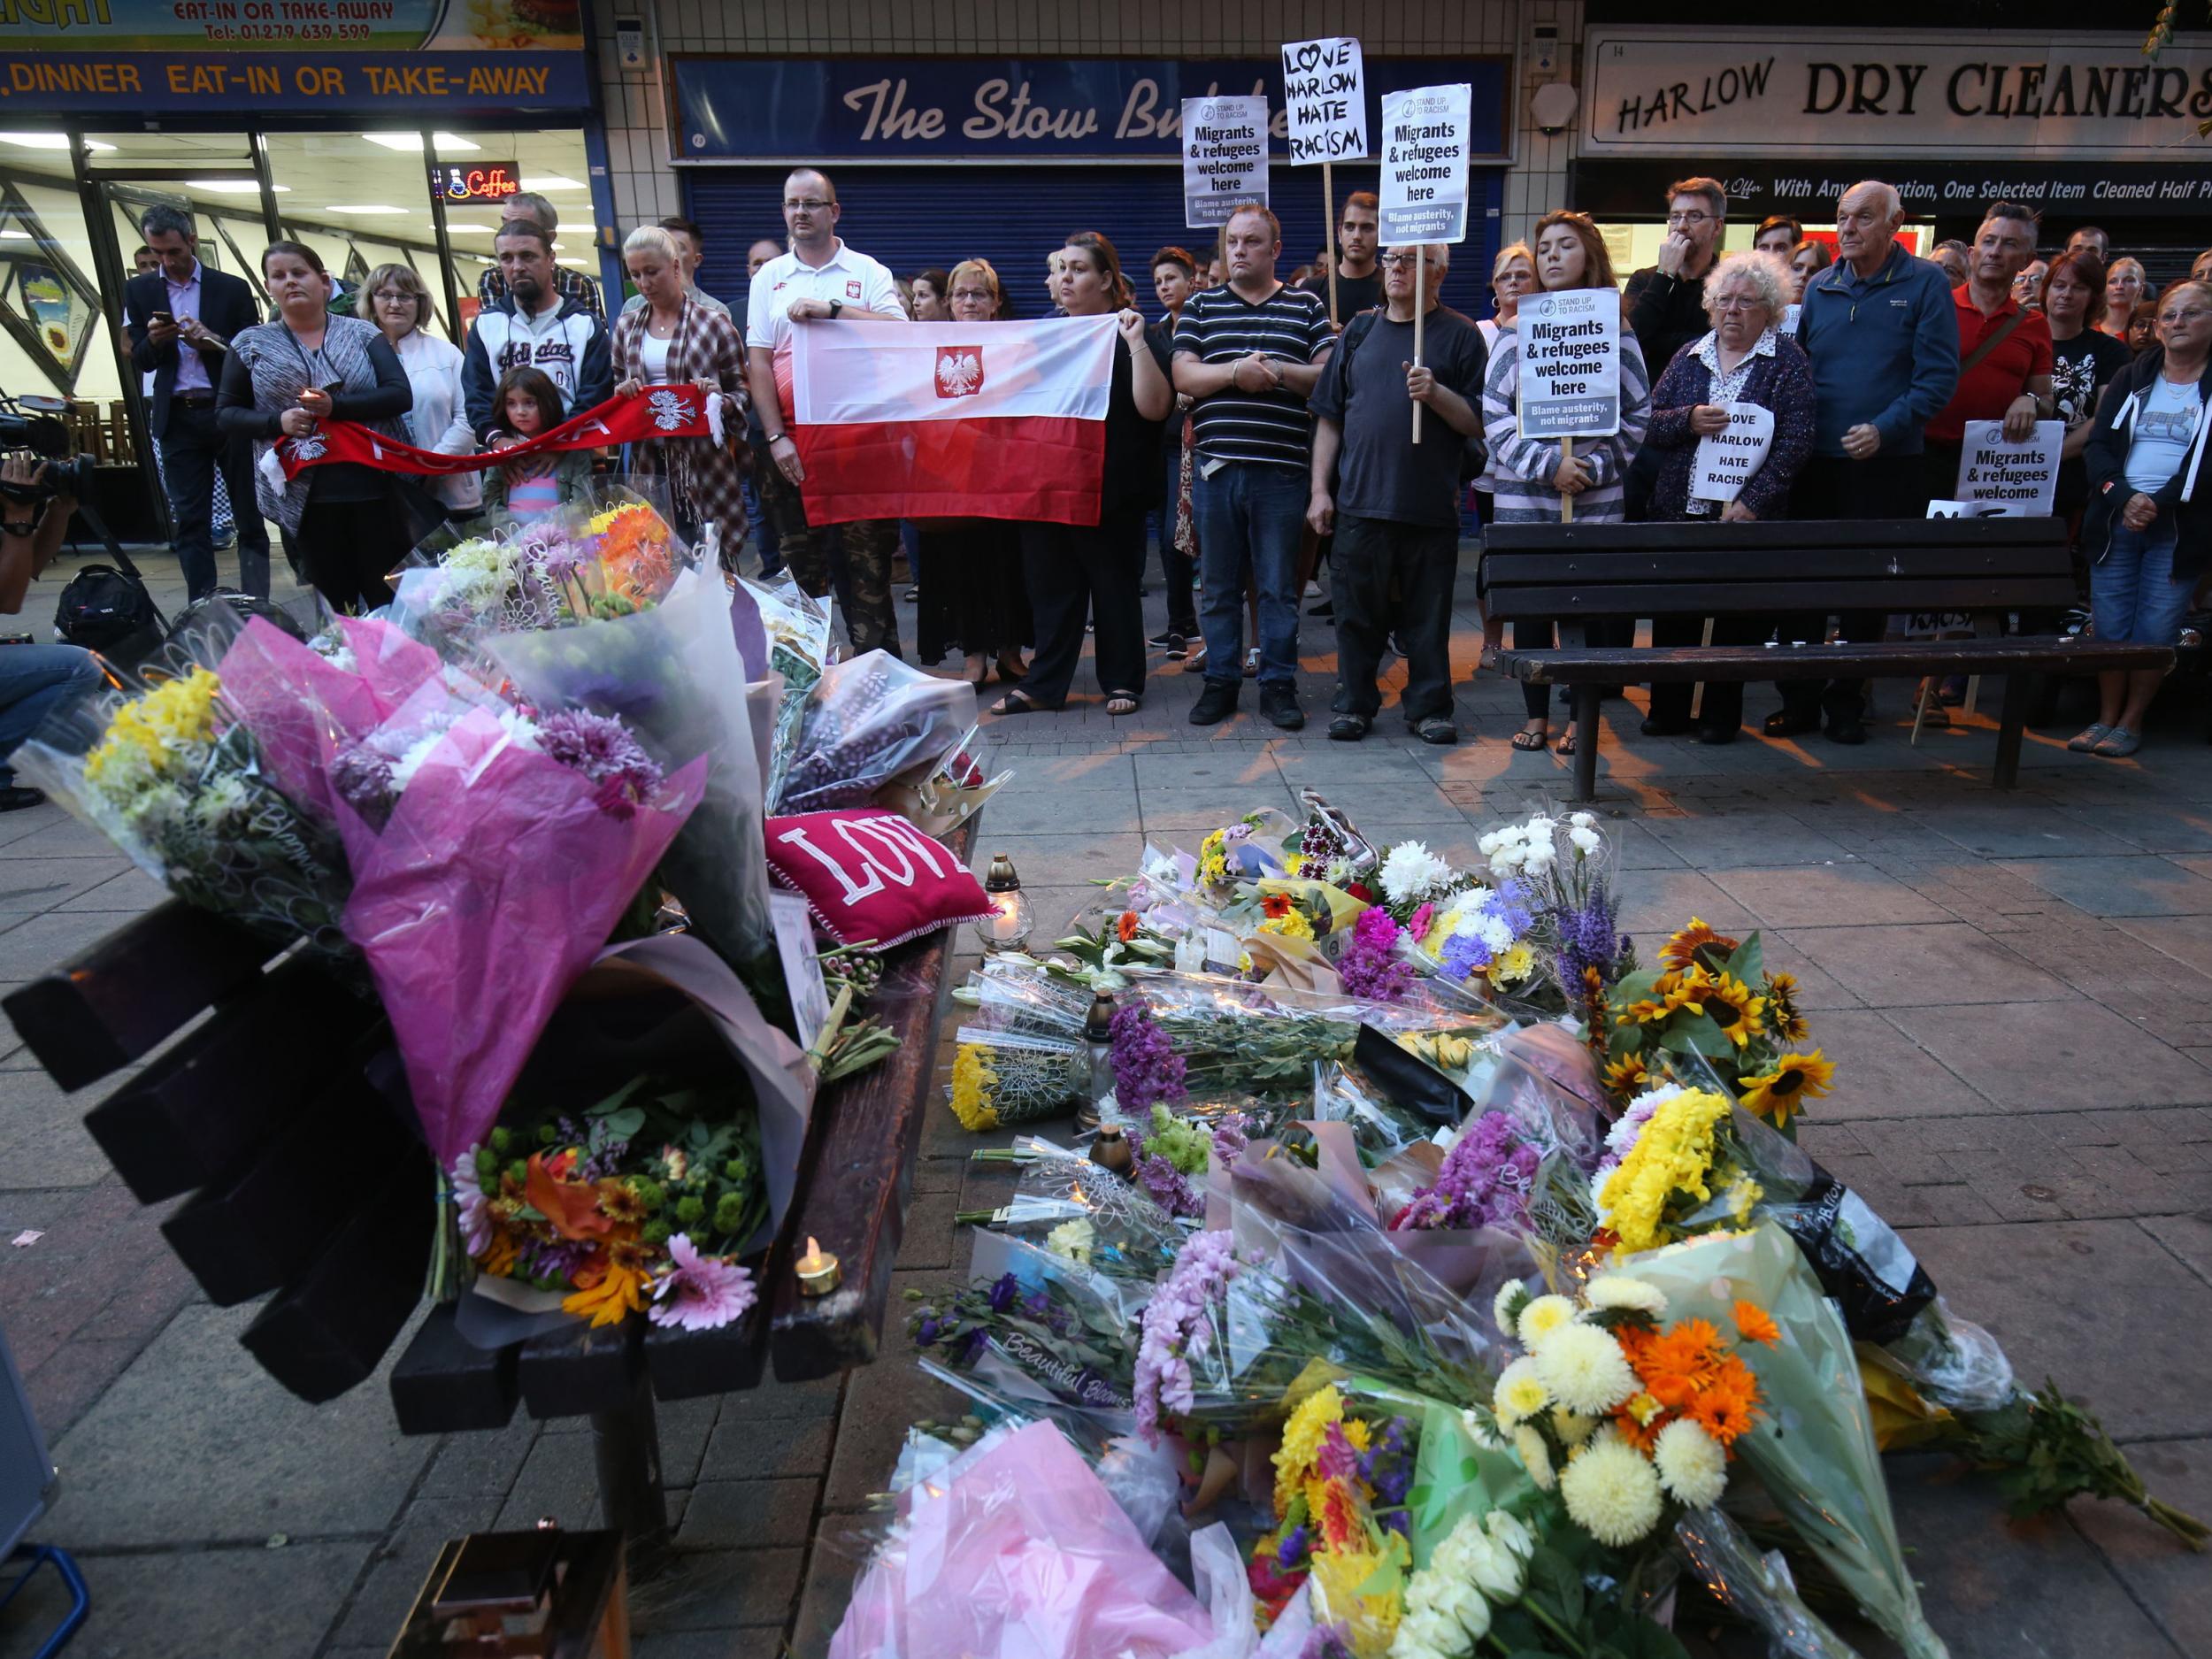 A vigil held in Harlow for Arek Jozwik, a Polish man killed in an attack believed to be a hate crime